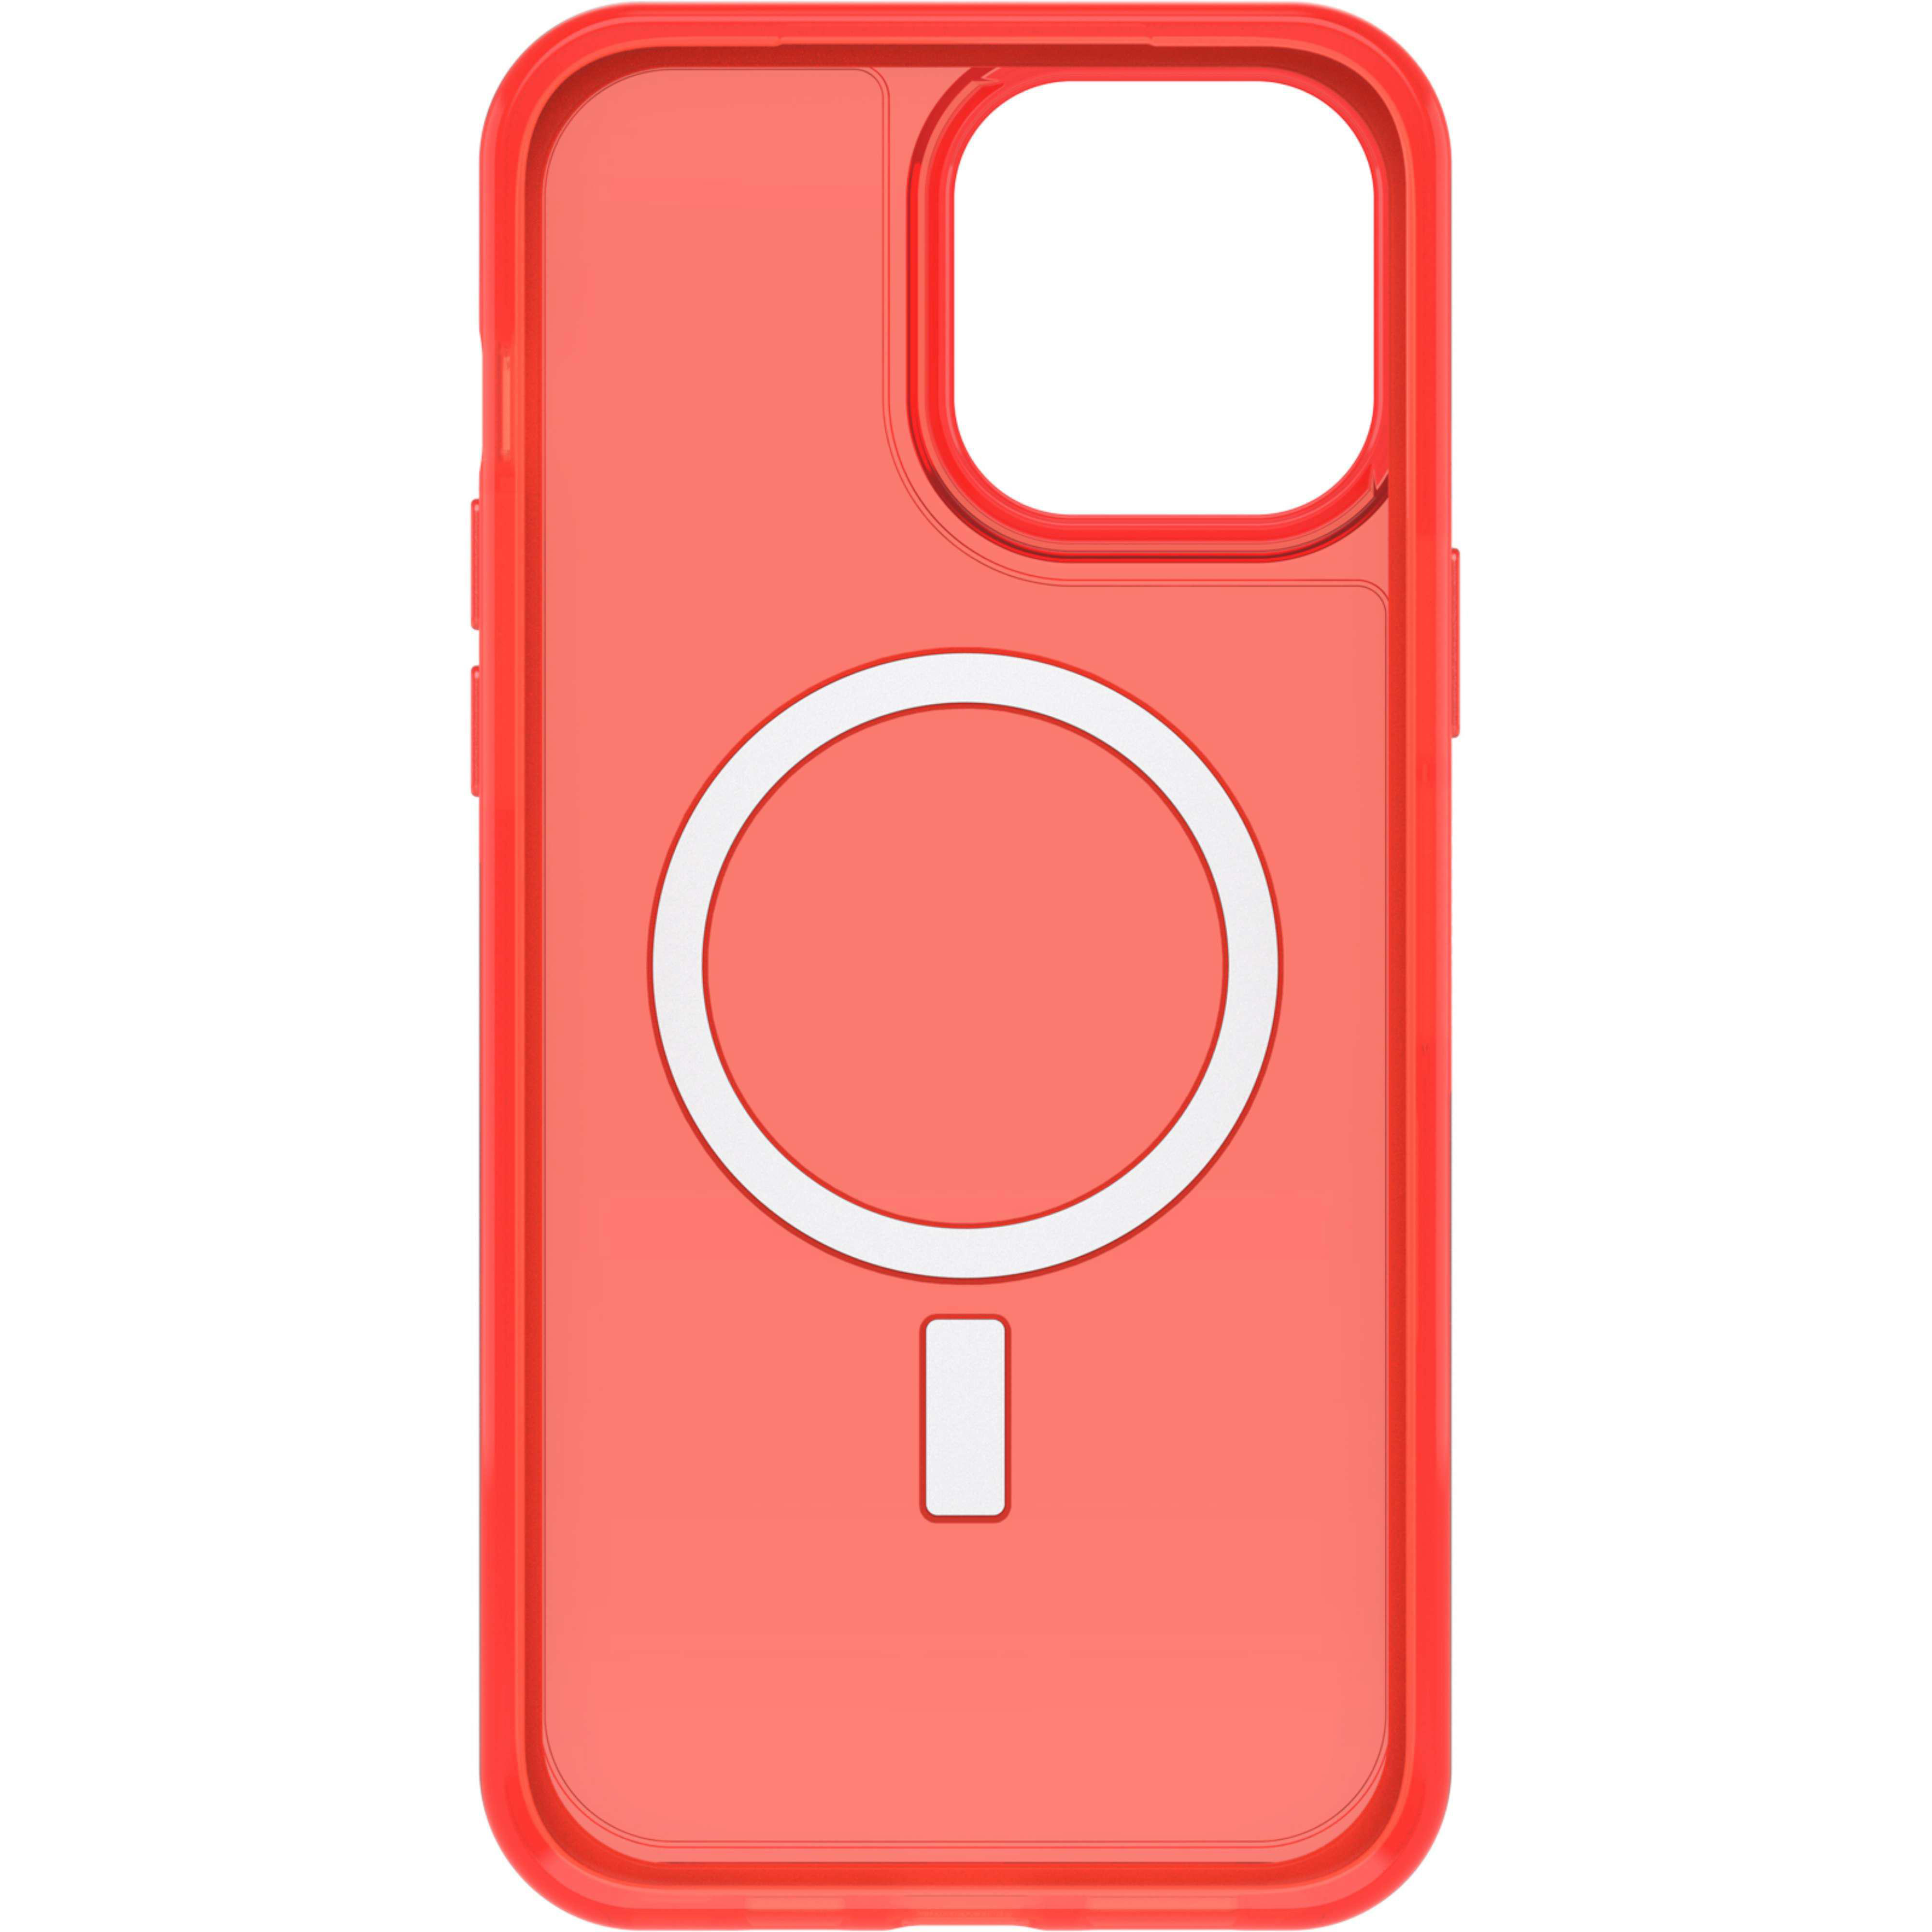 OTTERBOX Symmetry, iPhone Apple, Backcover, 13 Transparent Pro Max, Rot 